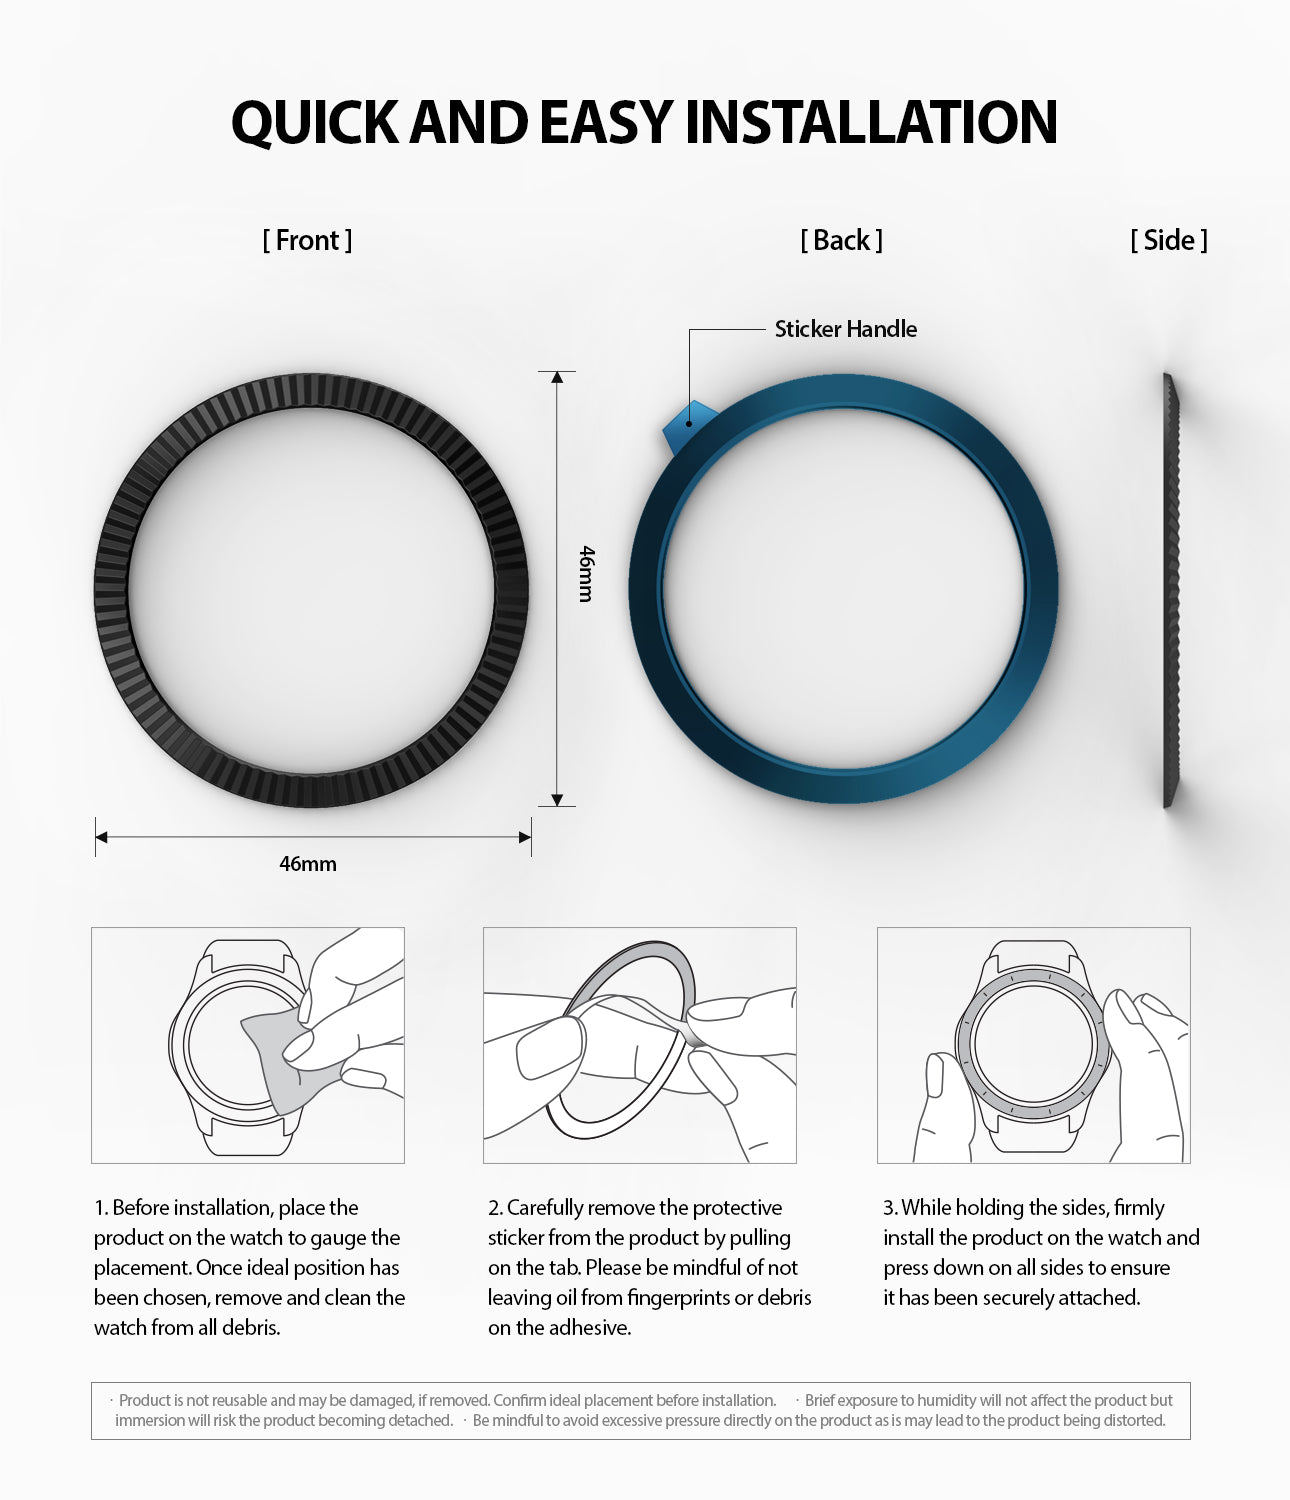 quick and easy installation guide of bezel styling for galaxy watch 46mm, gear s3 frontier and classic